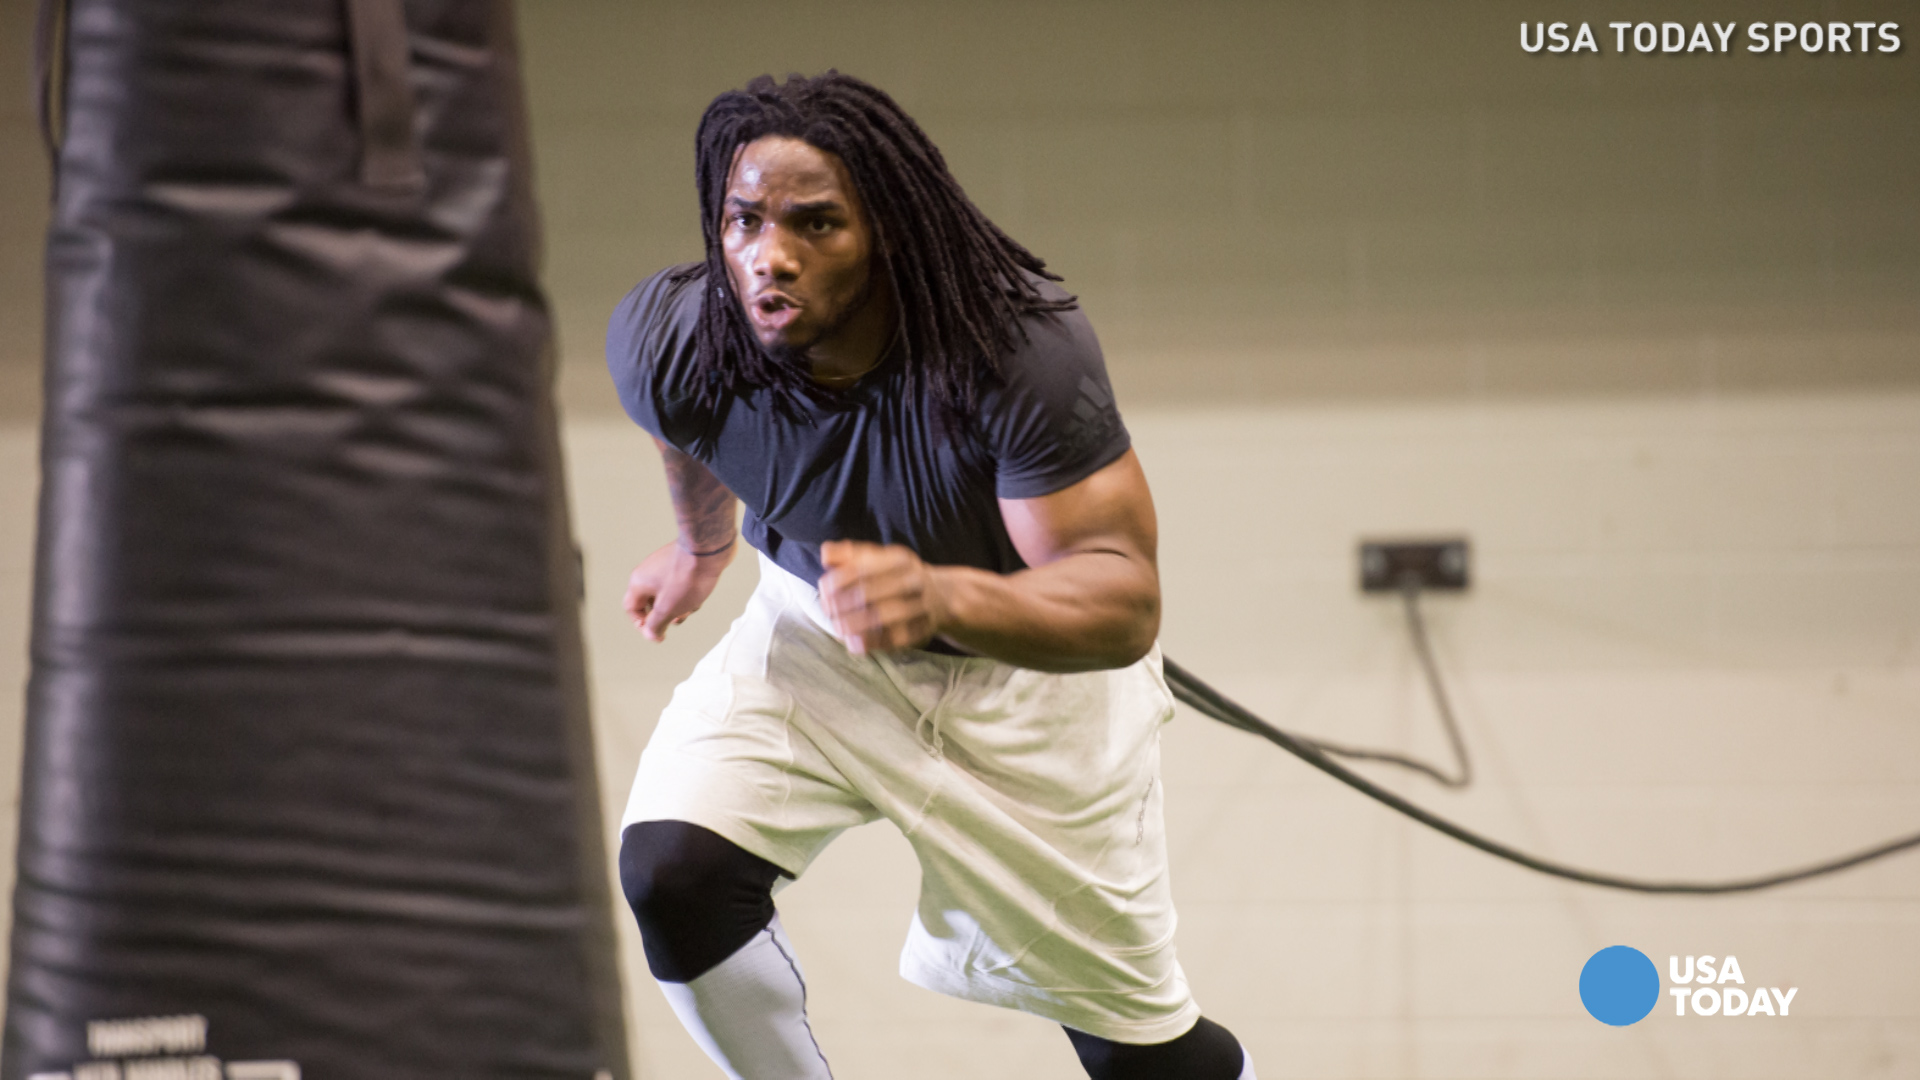 20 Minute Jaylon smith workout for Girl